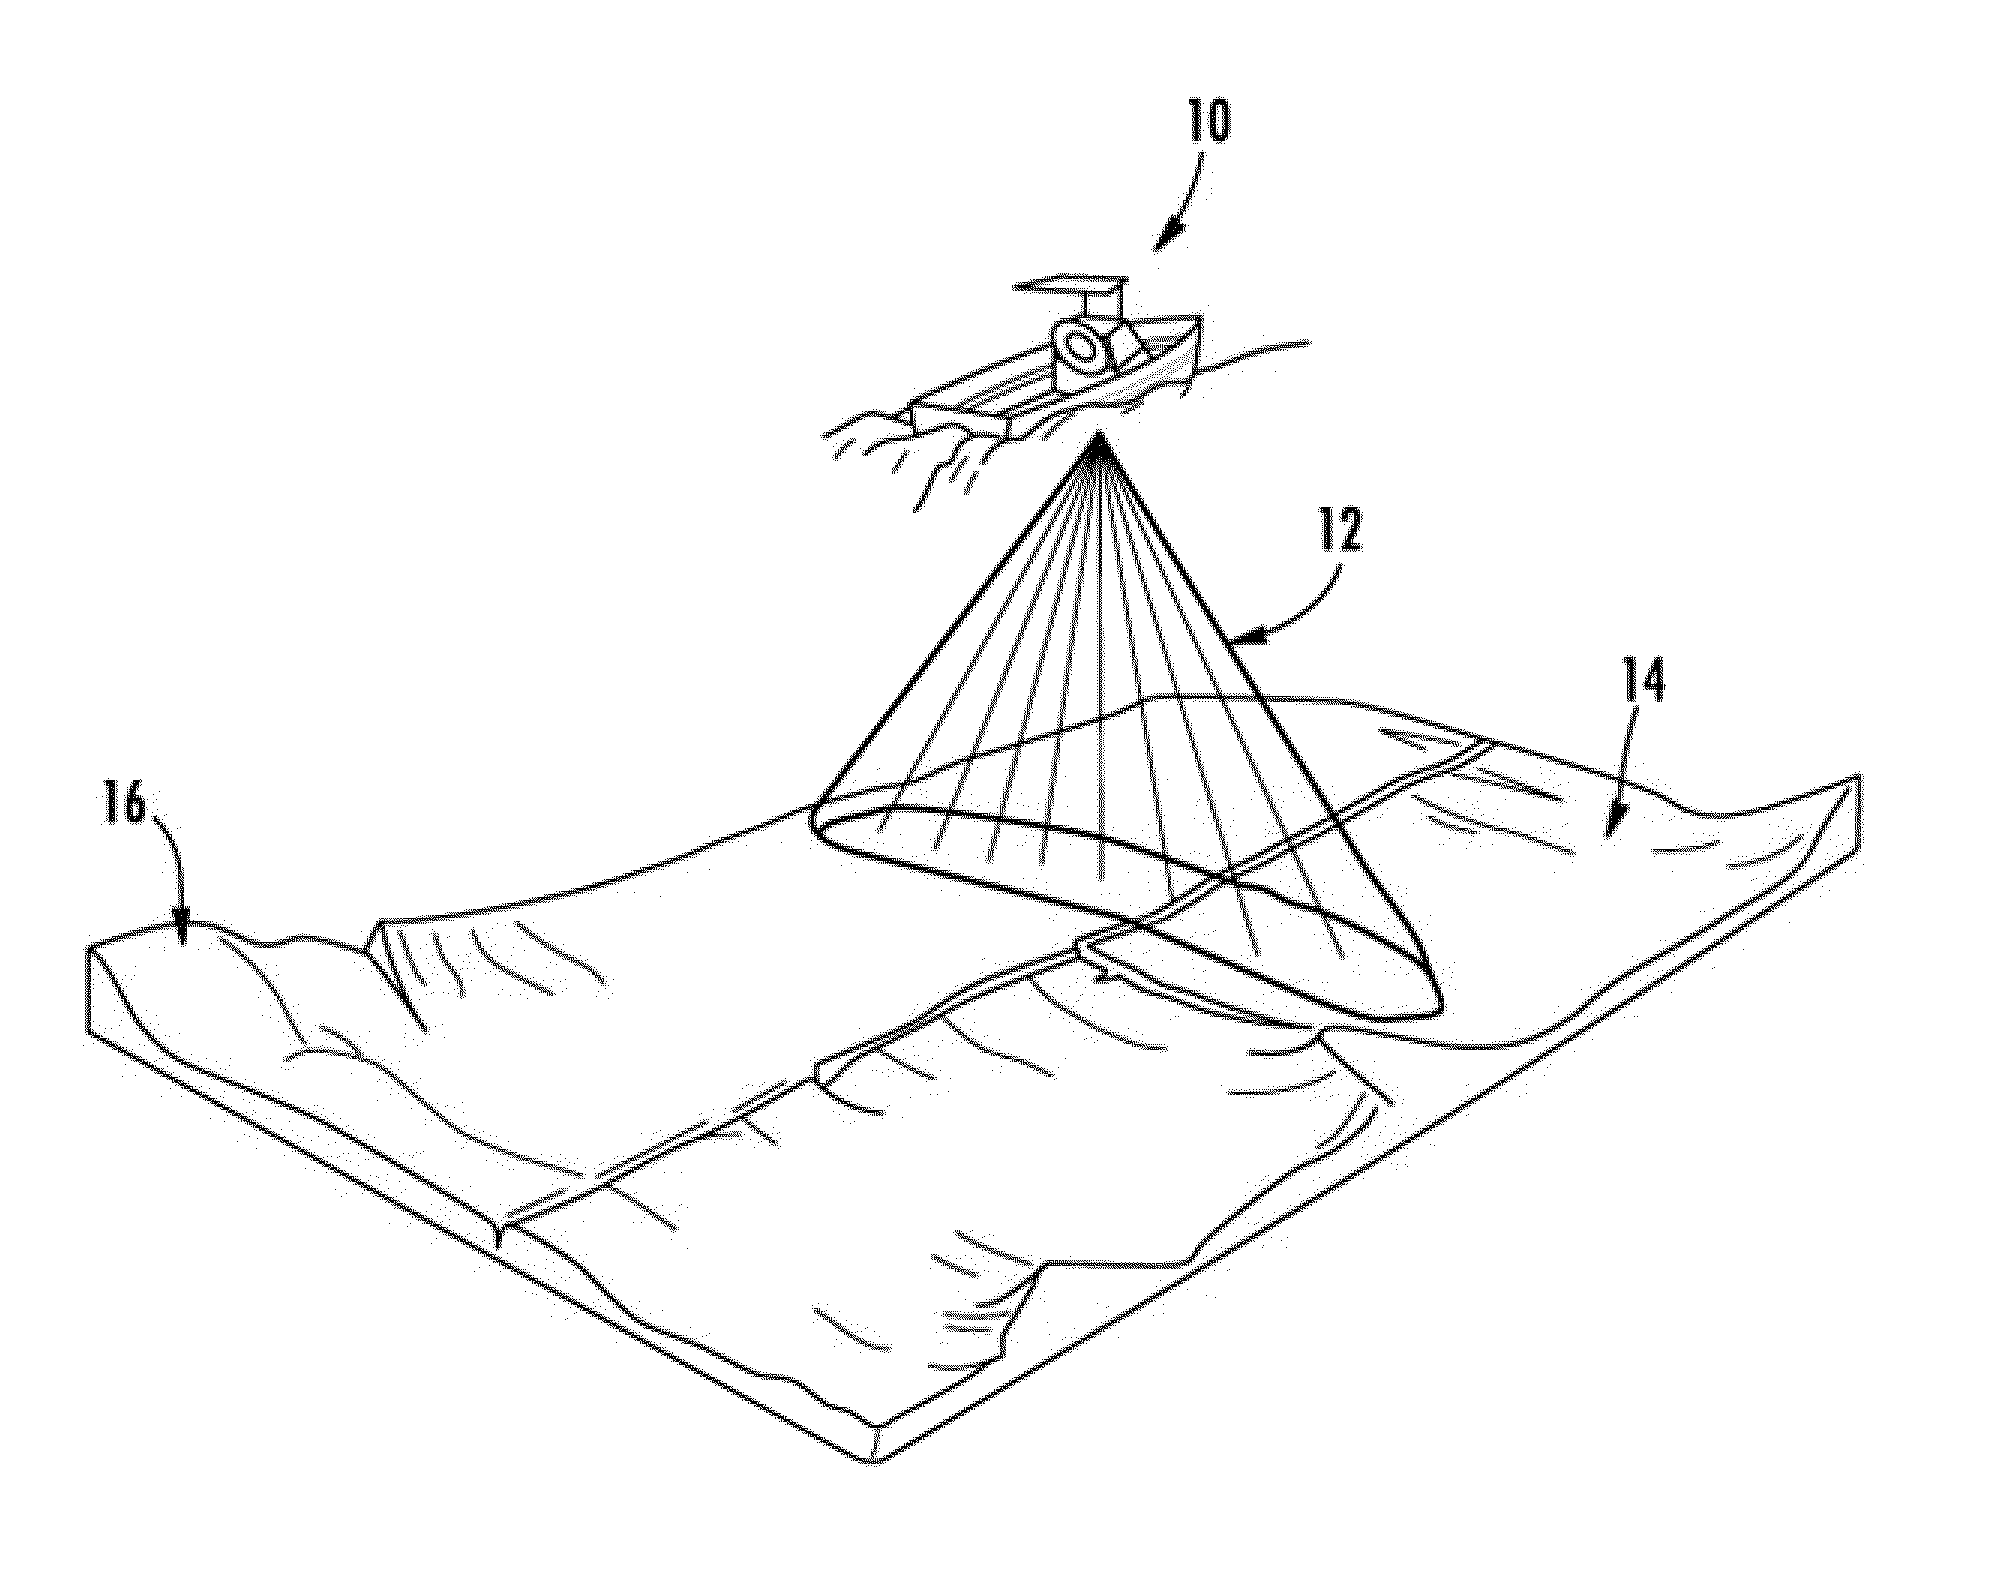 Systems and associated methods for producing a 3D sonar image